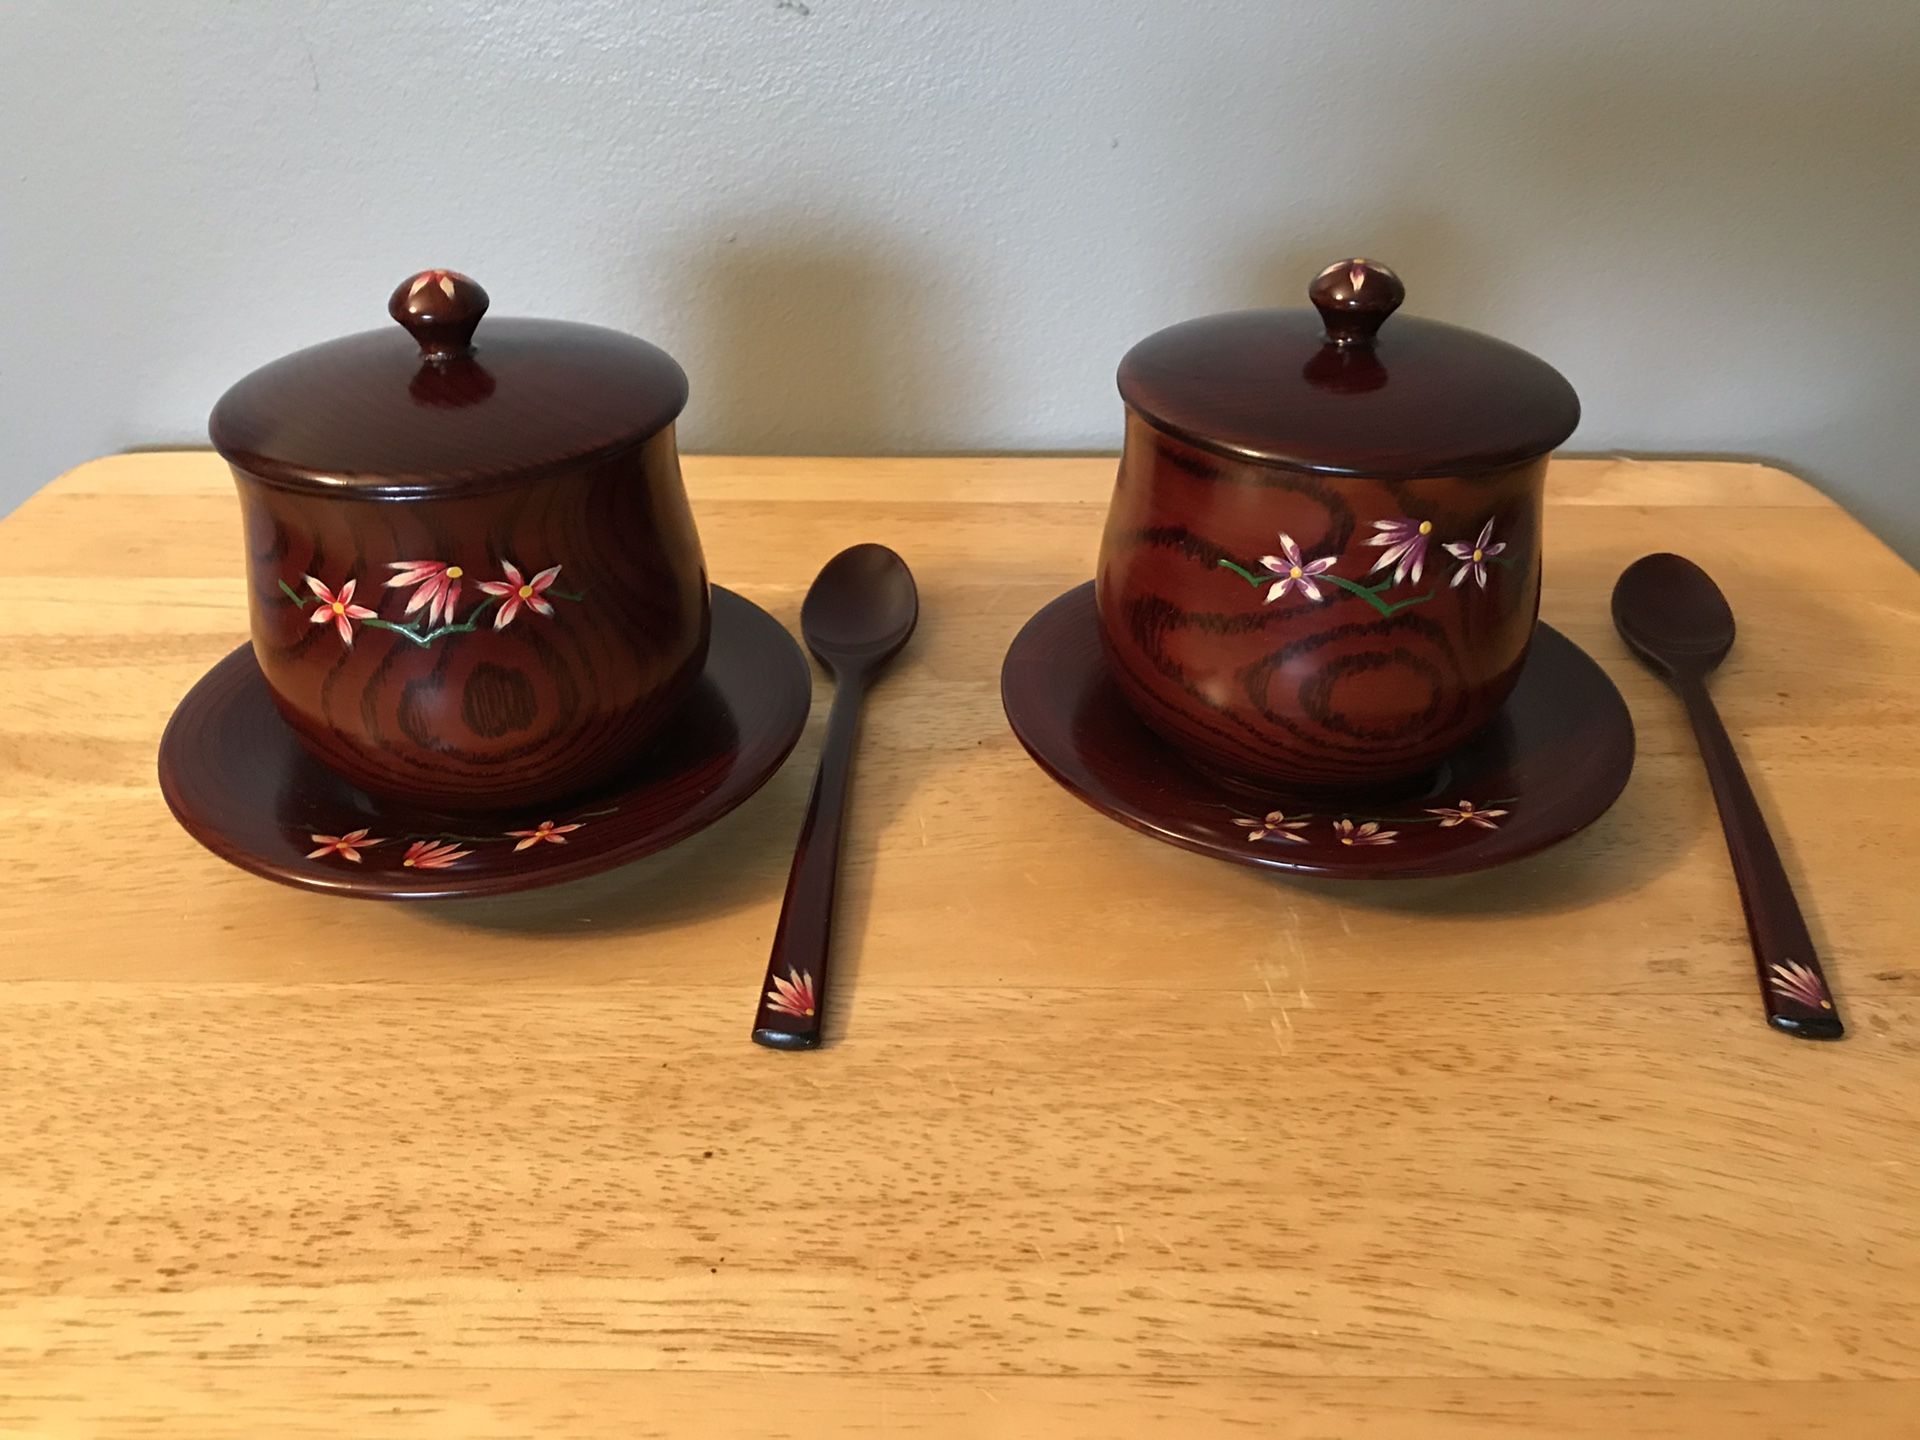 Asian Wooden Tea Set for 2 with Floral Design